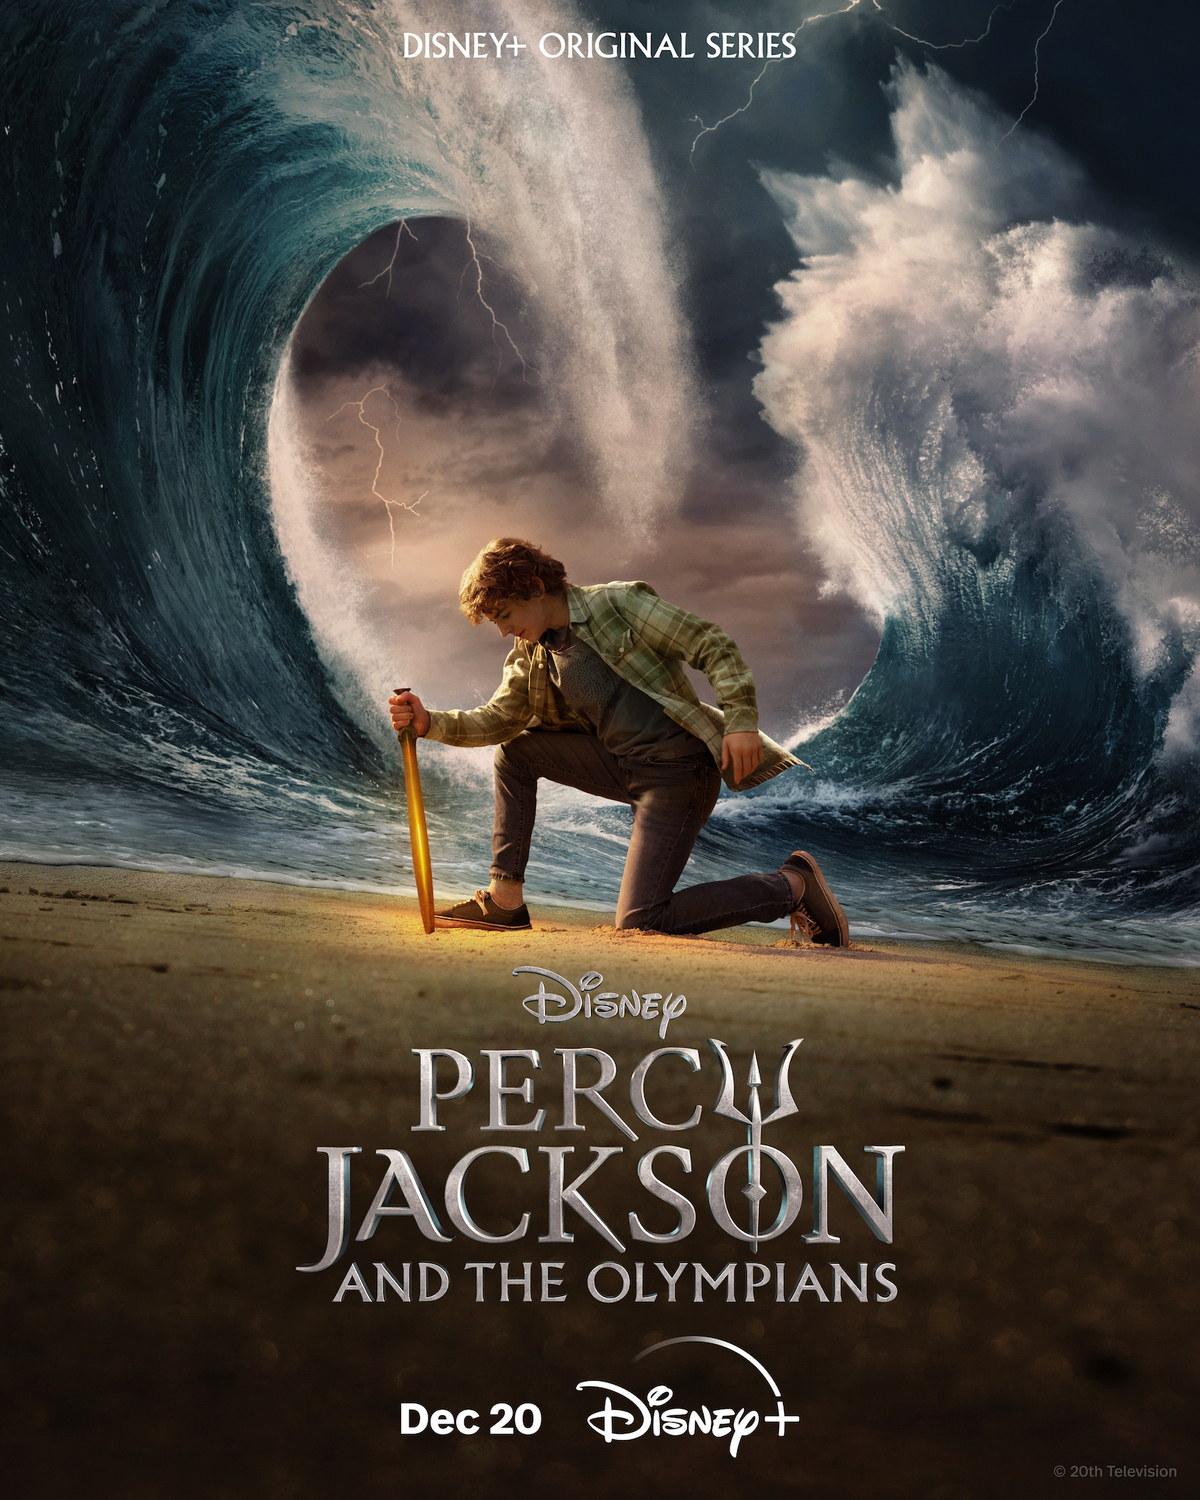 Series Poster for “Percy Jackson and the Olympians”

